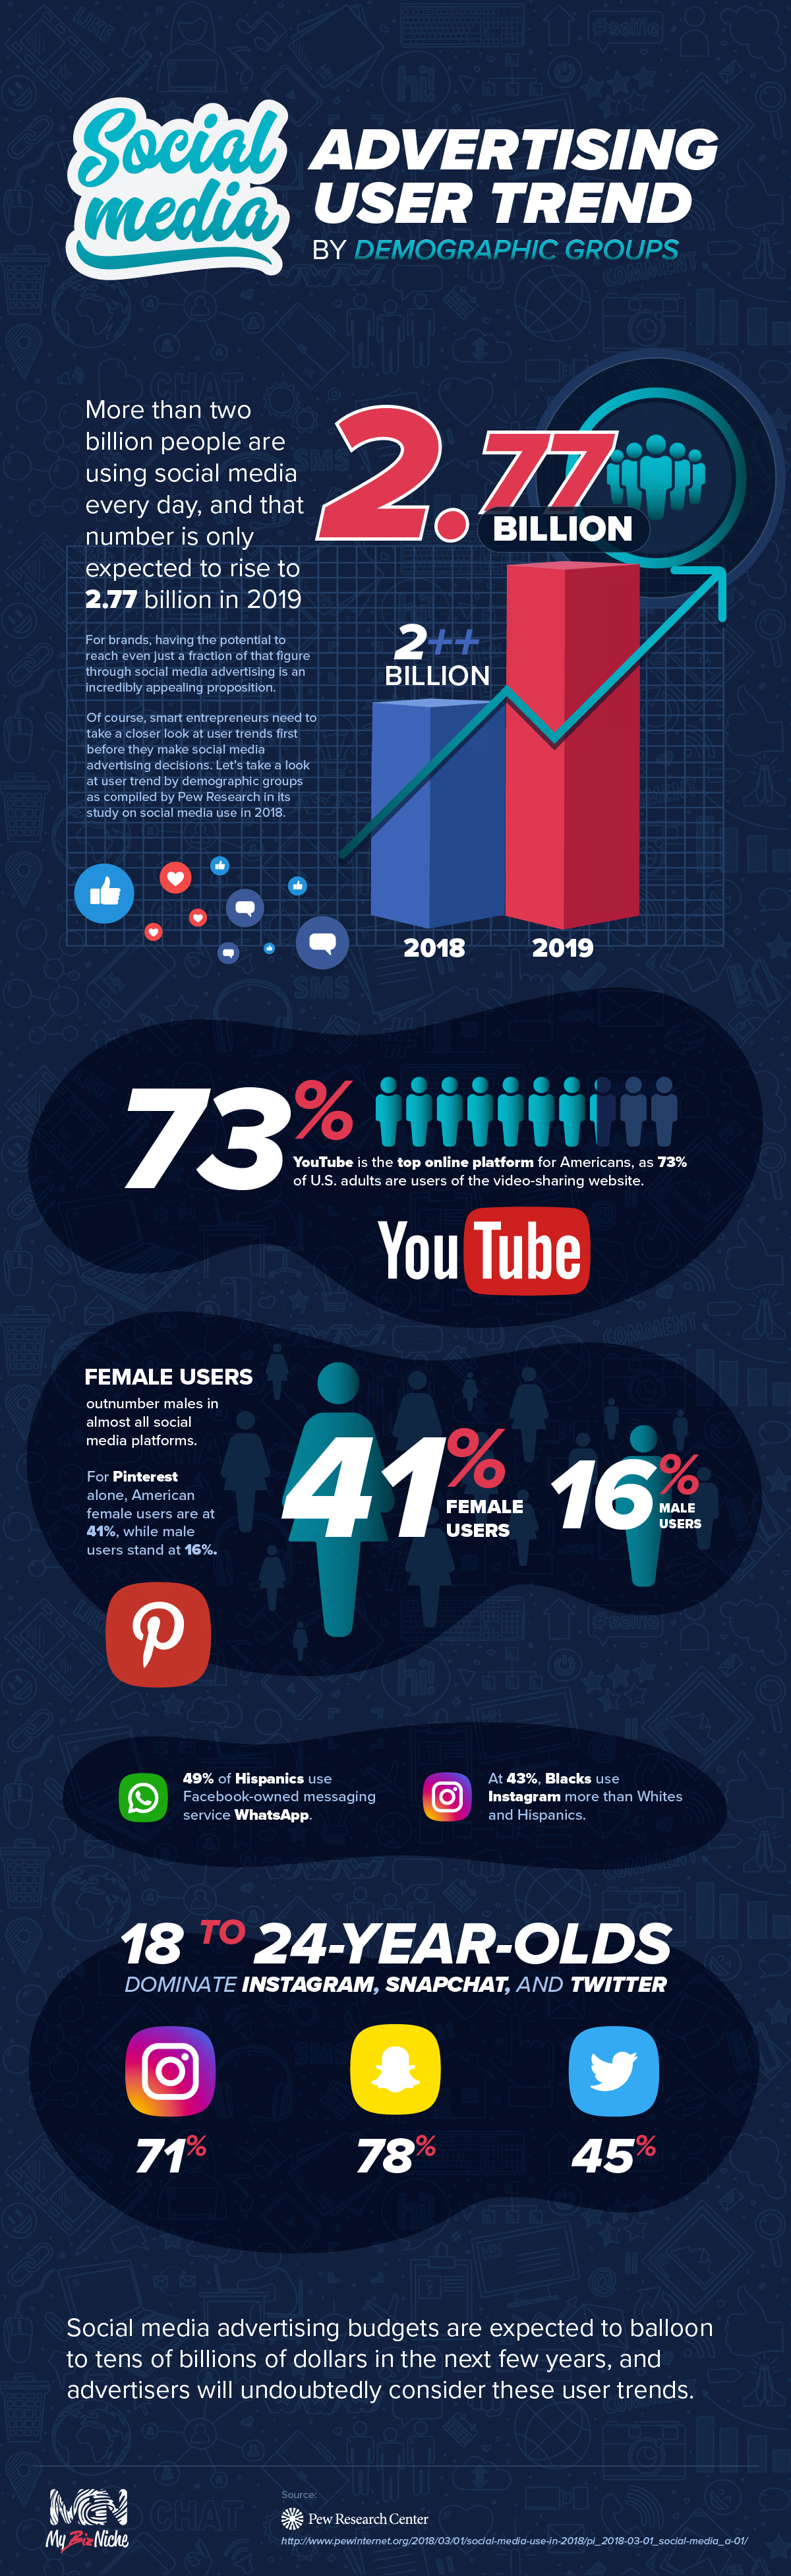 Infographic - Social Media Advertising - User Trend By Demograph